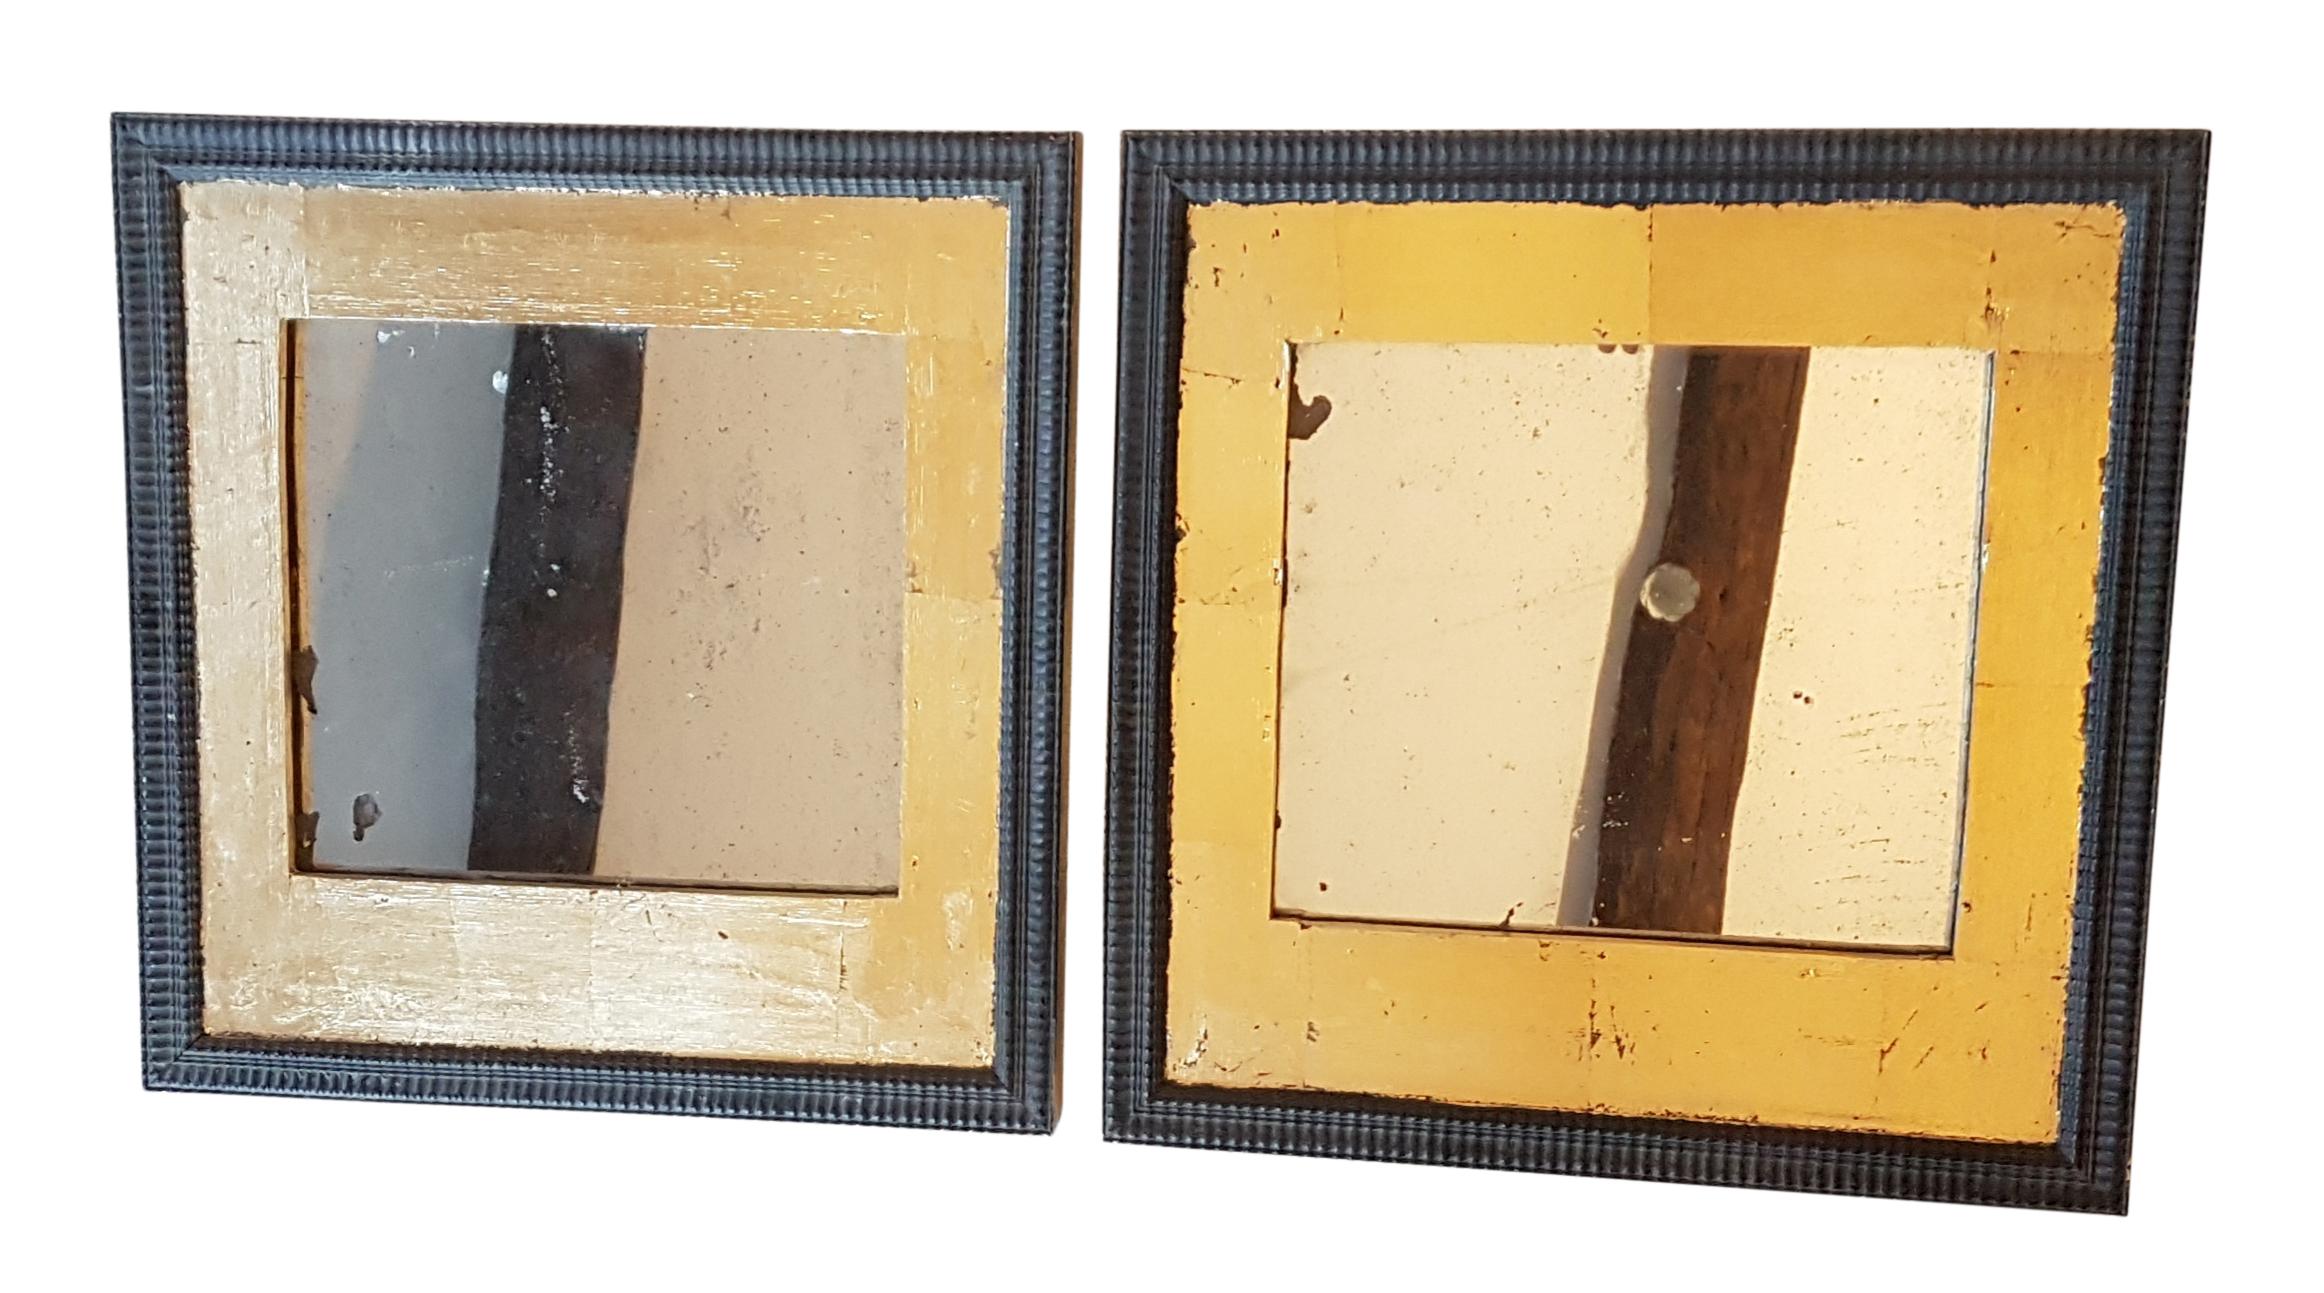 A very nice unique and decorative pair of mirrors. The frames are mid-19th century oak on pine with mahogany moldings with later gilt decoration over the oak. 19th century pitted and foxed mirror plates have been fitted into them.